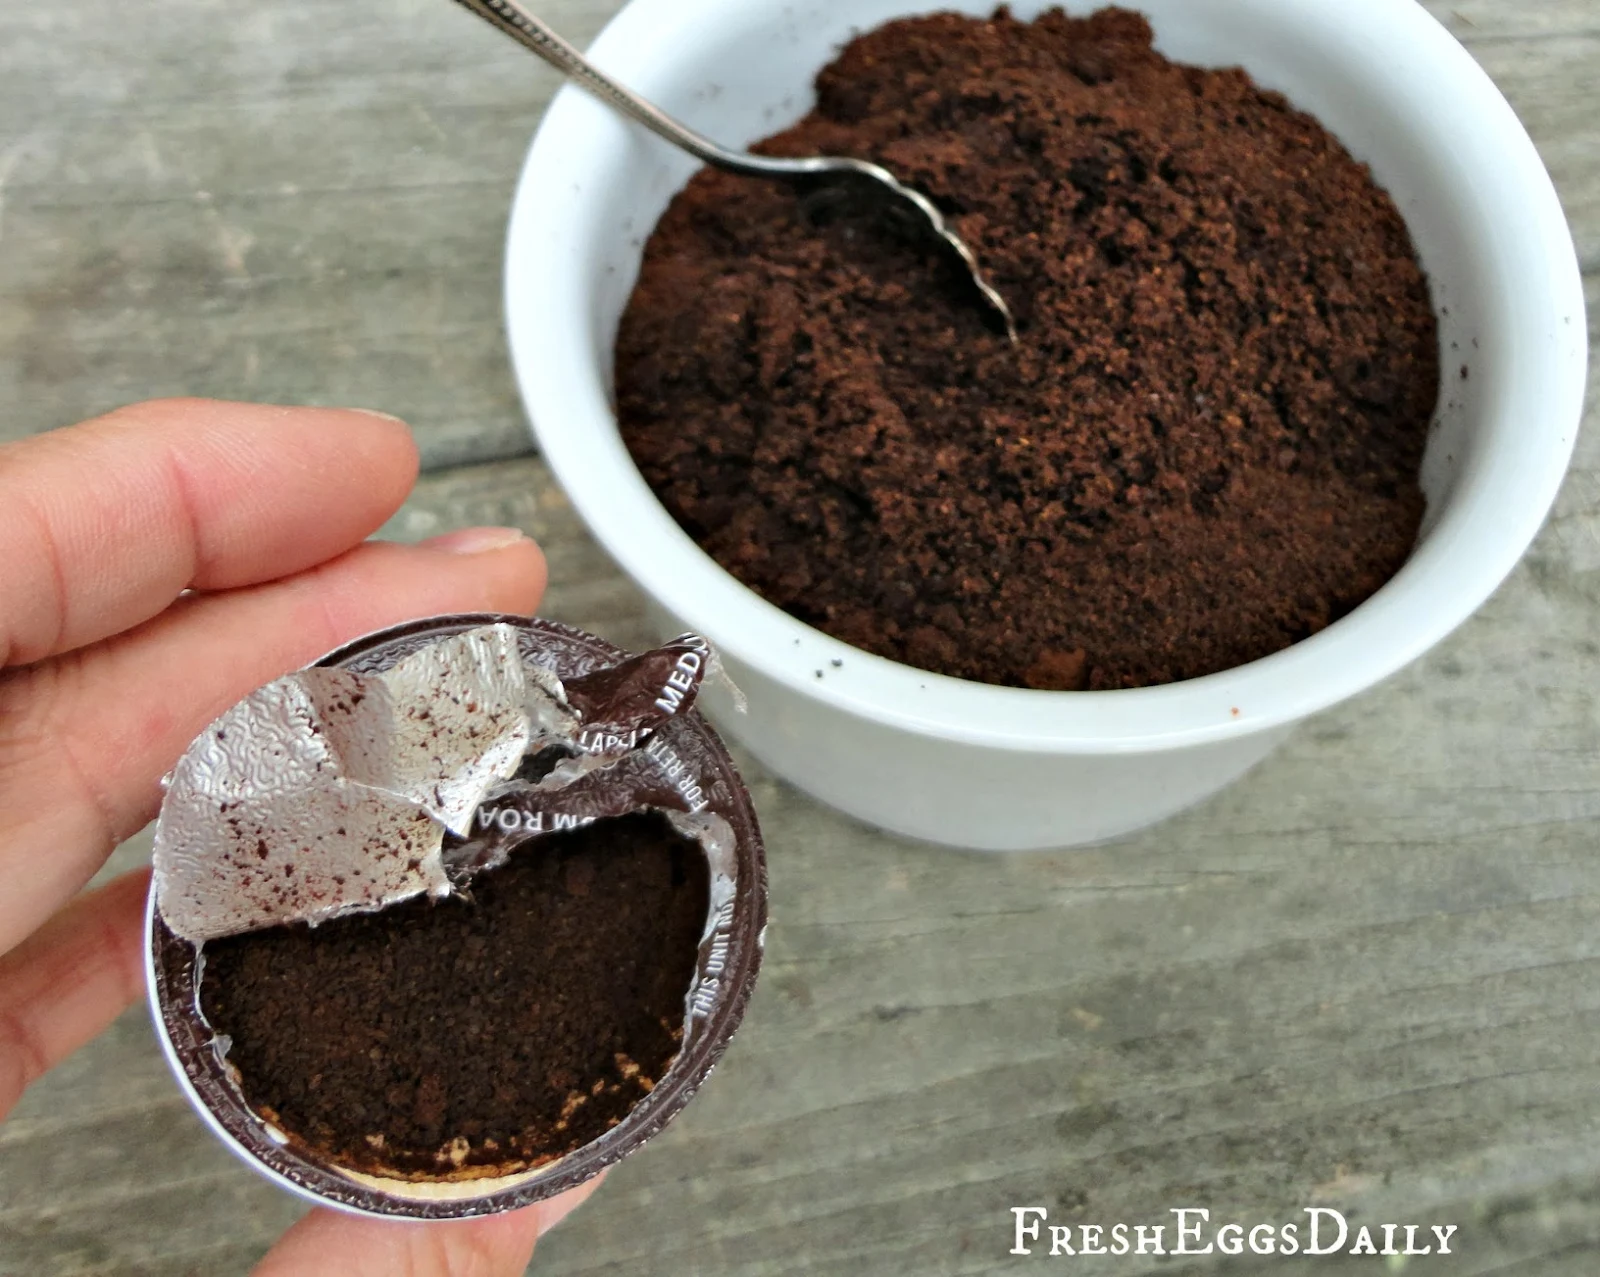 recycling k-cups for the garden